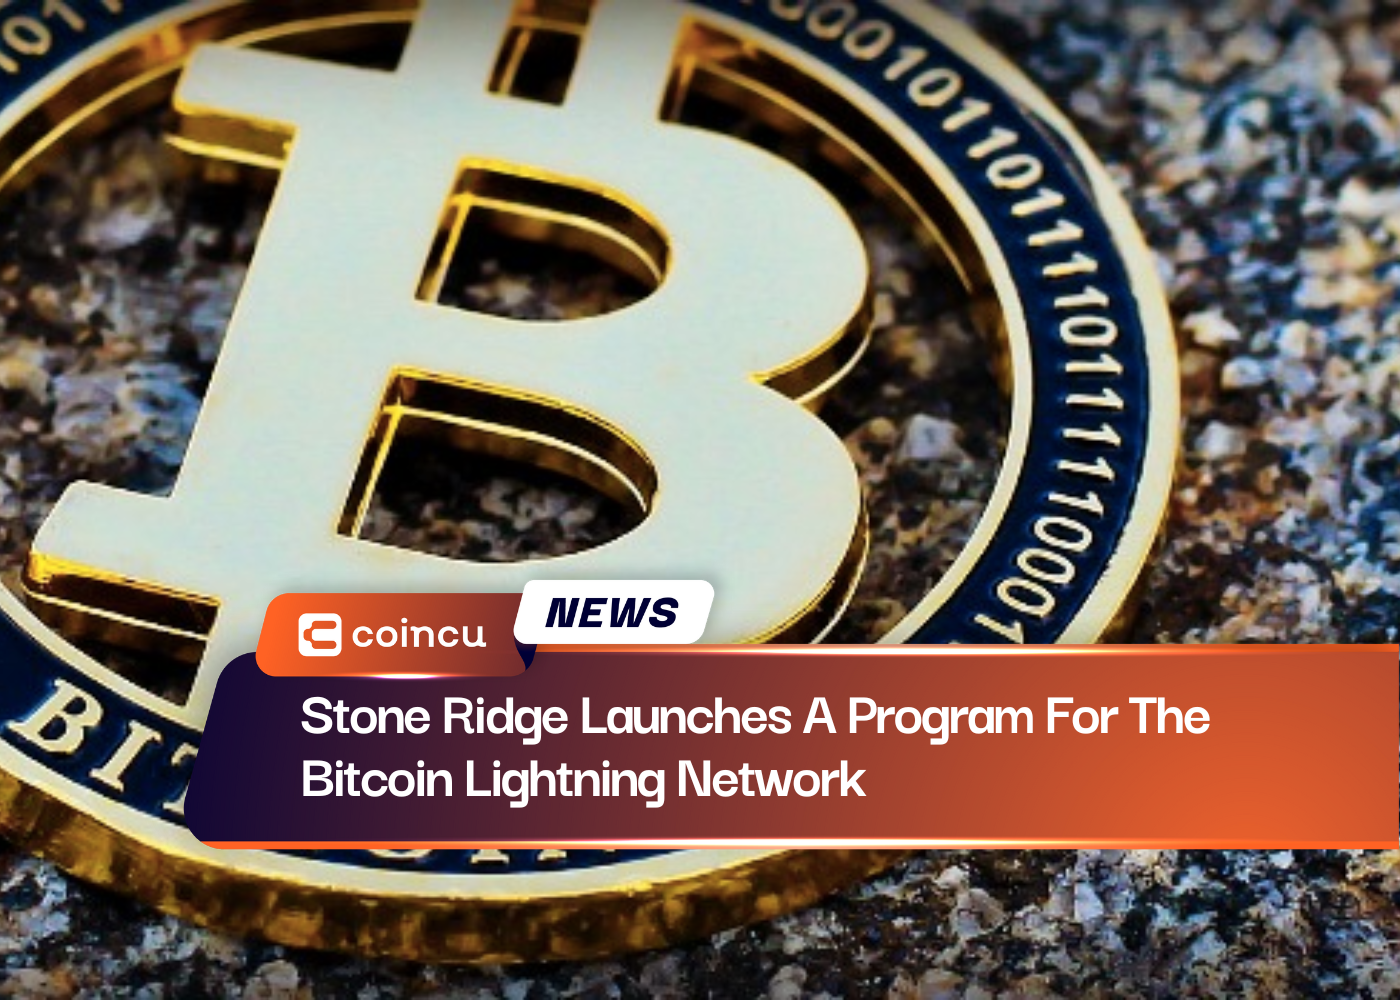 Stone Ridge Launches A Program For The Bitcoin Lightning Network